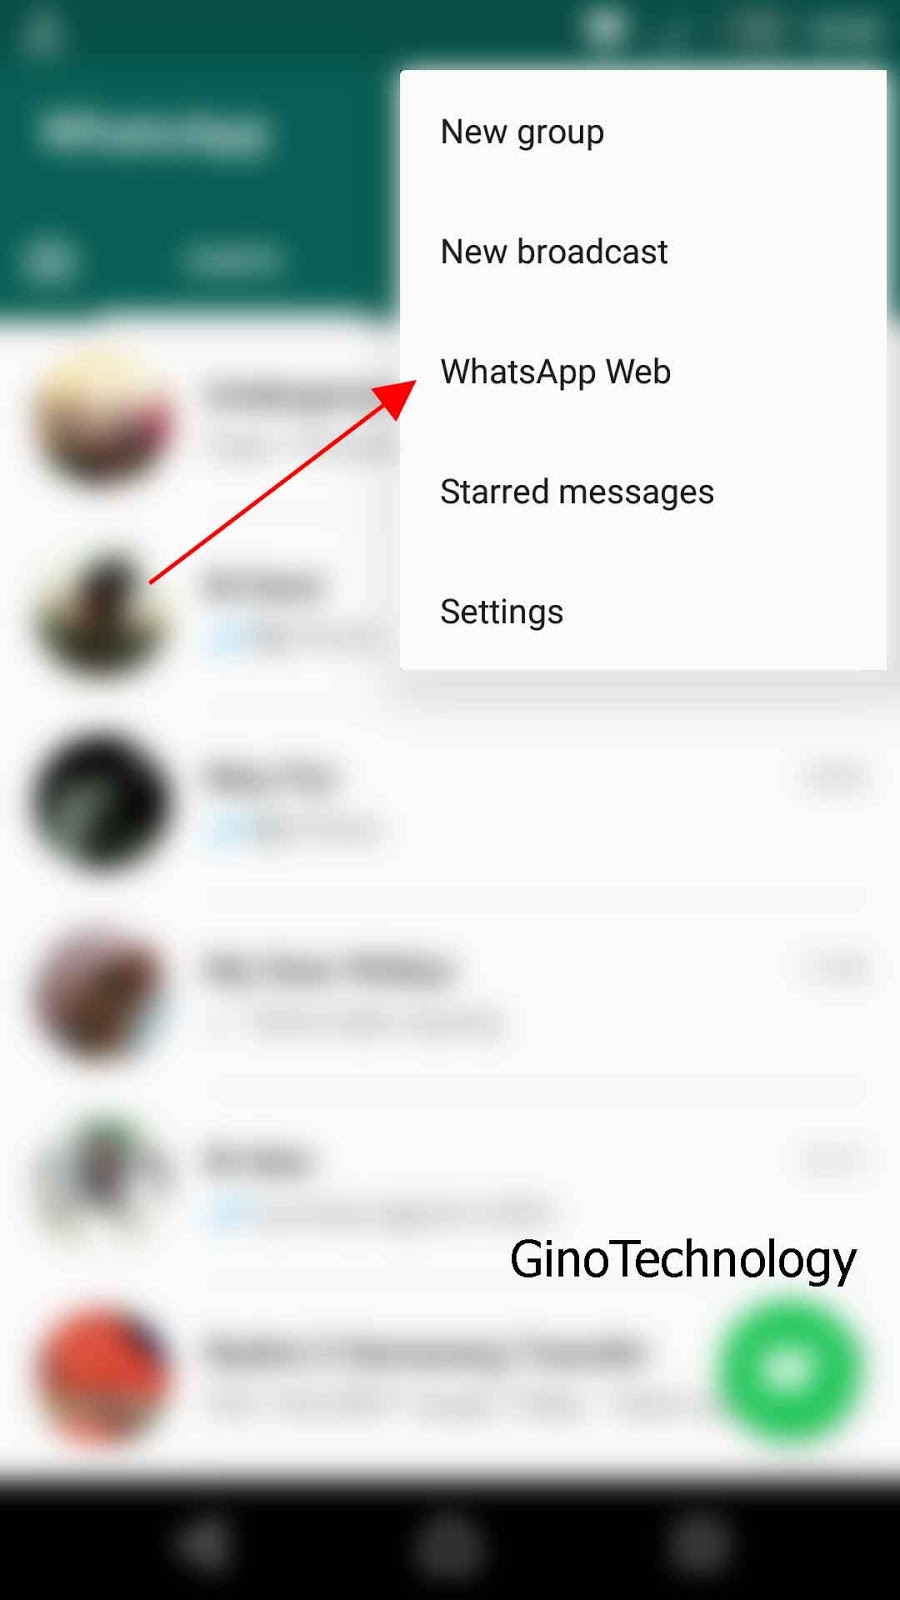 How to use whatsapp on pc without phone number online